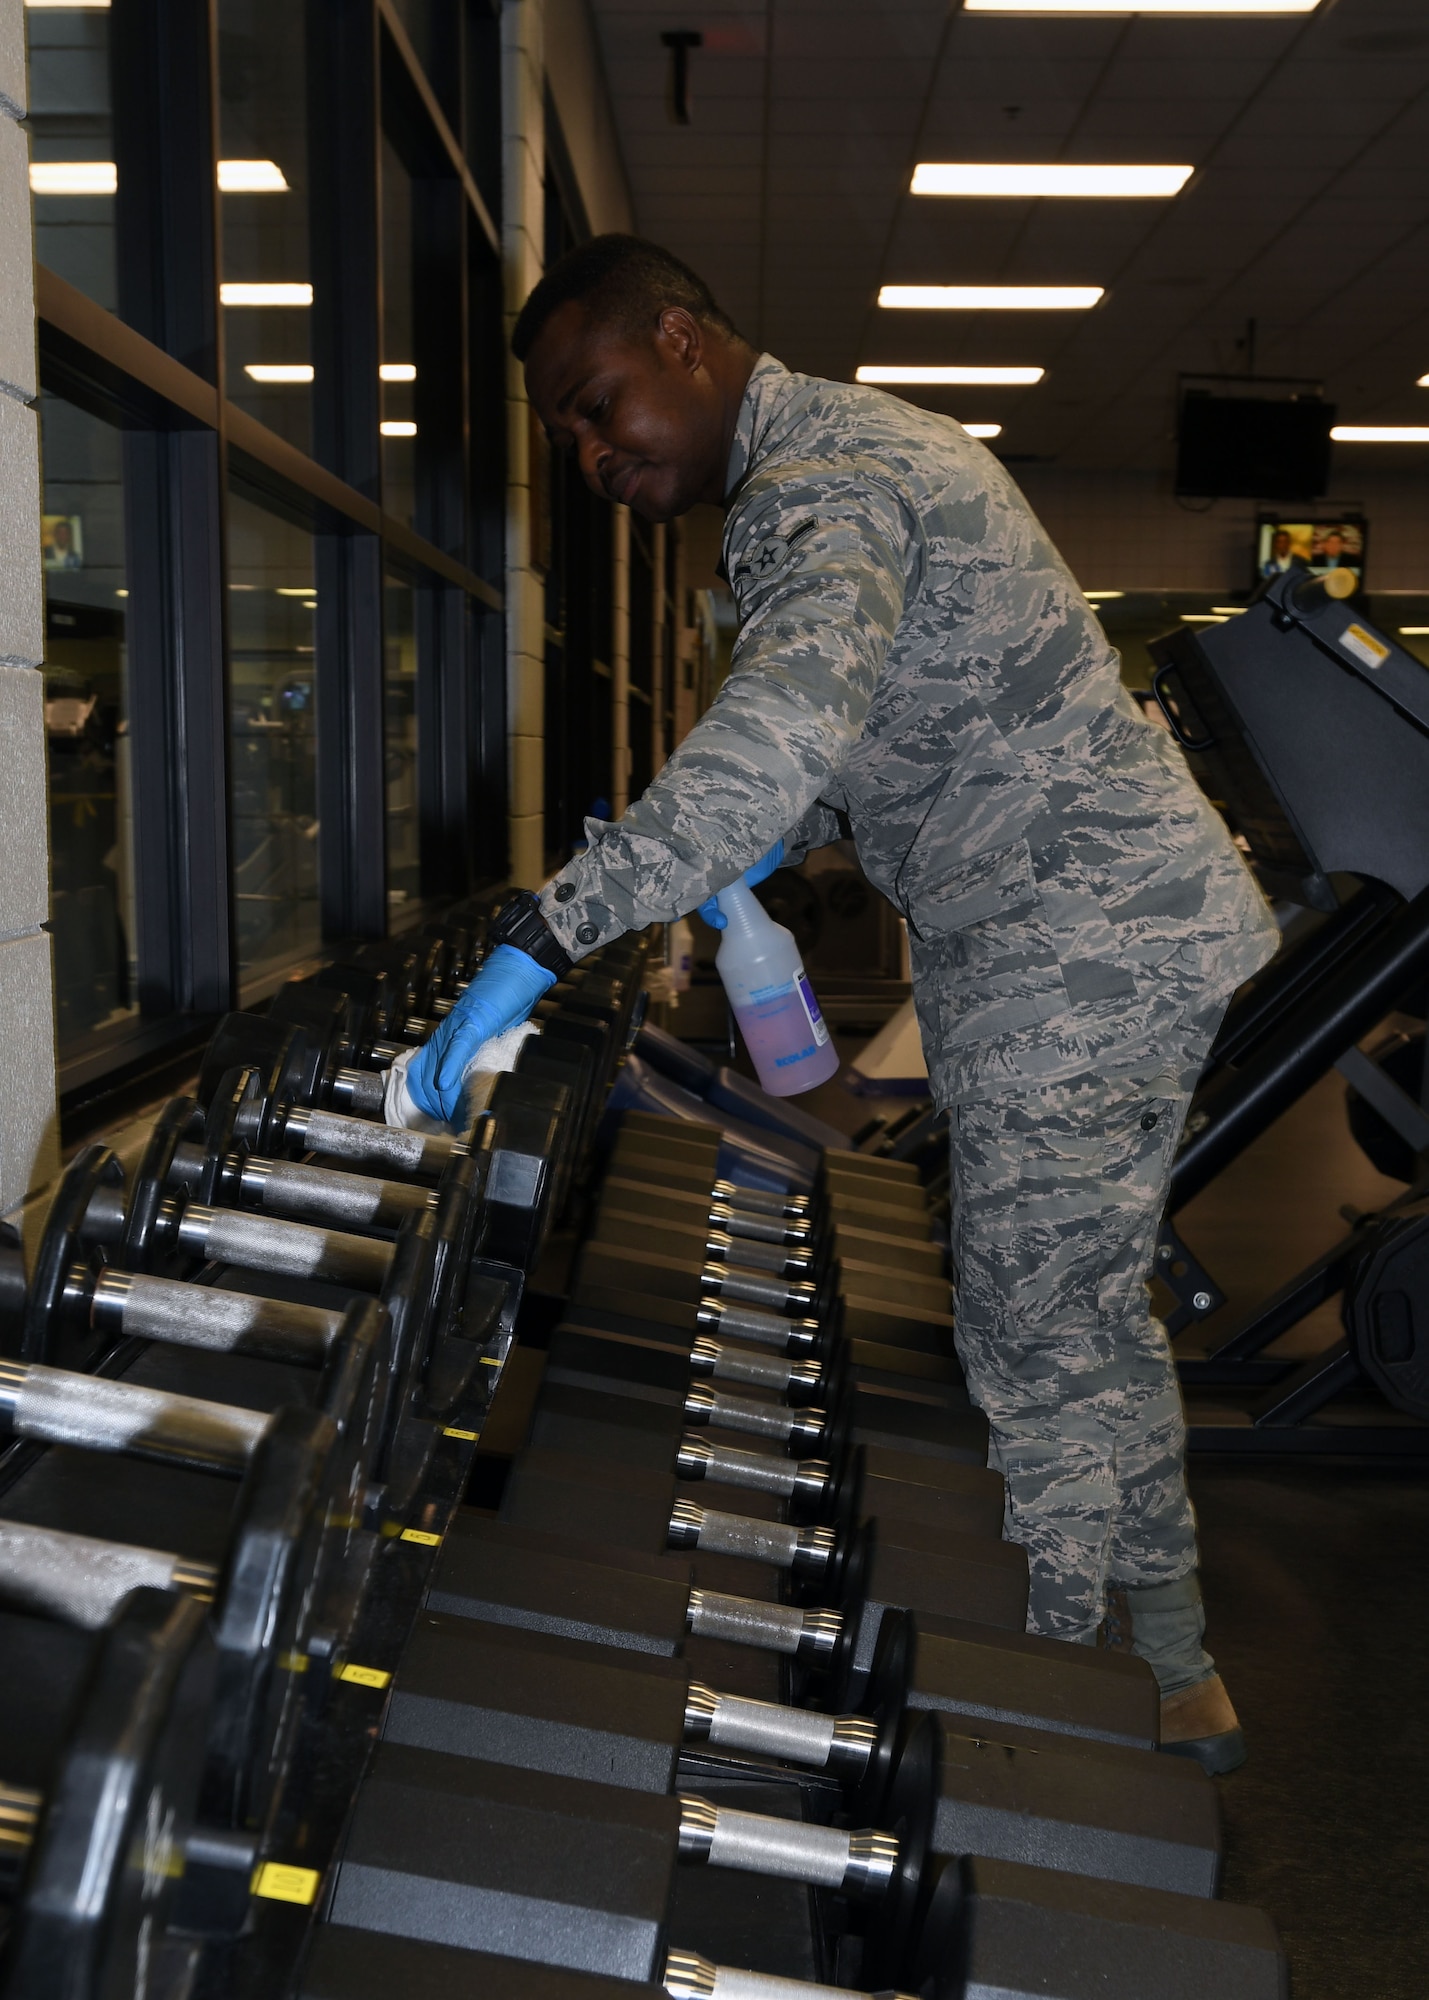 Airman Moise Azuma, 22nd Force Support Squadron fitness and sports apprentice, sanitizes dumbbells June 19, 2020, at McConnell Air Force Base, Kansas. The staff cleans the facility thoroughly twice a day, without customers present as an extra sanitation measure to keep everyone healthy who works and uses the gym. (U.S. Air Force photo by Tech. Sgt. Jennifer Stai)